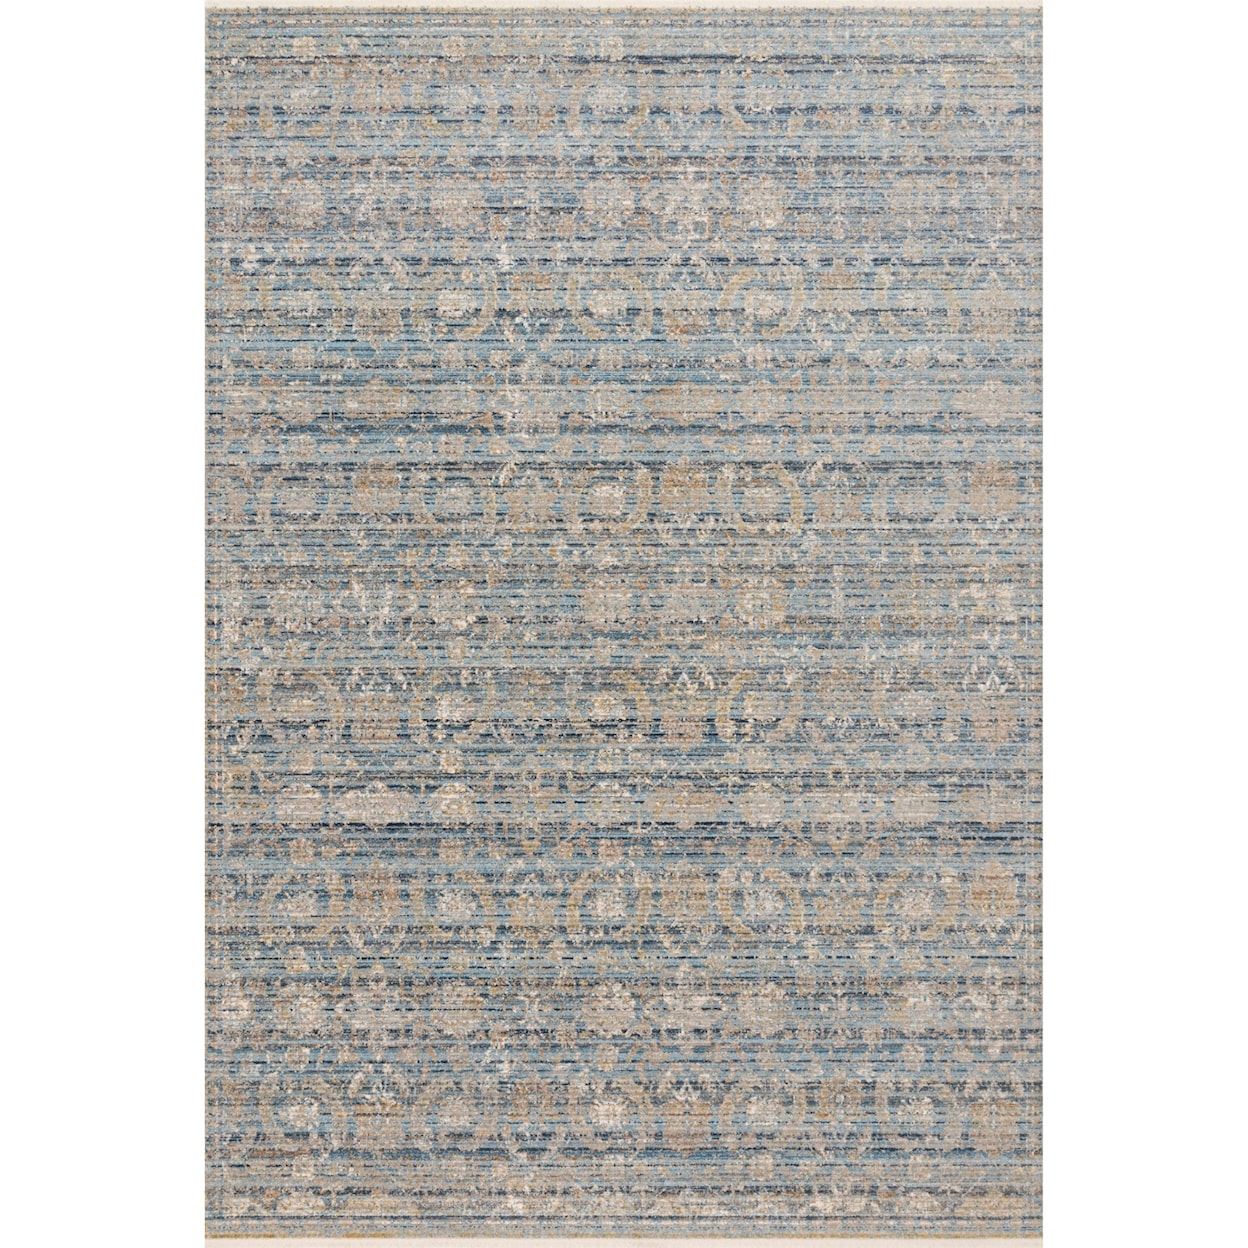 Reeds Rugs Claire 9'6" x 13' Ocean / Gold Rug